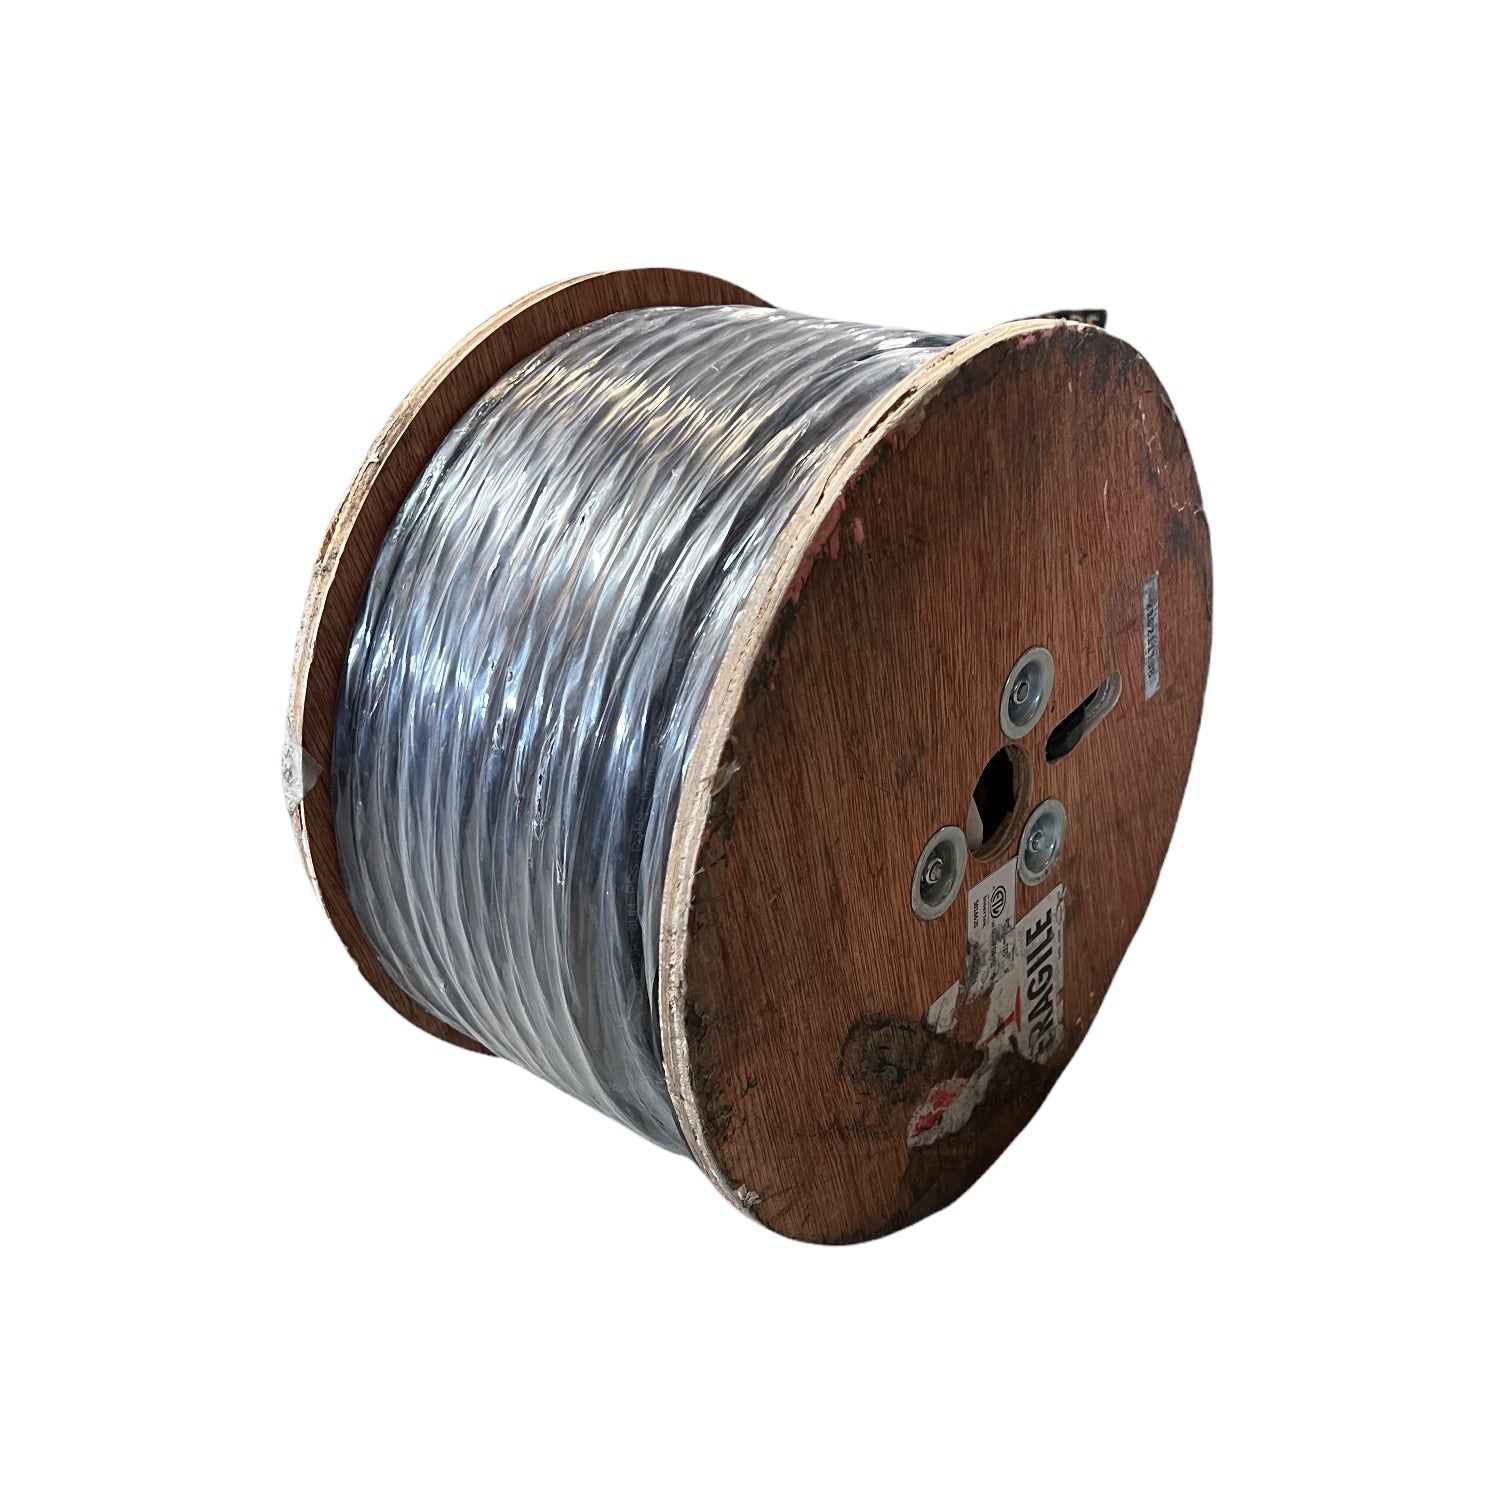 18/8X250 - Multi-Conductor Irrigation Control Wire, 18 awg, 18/8 X 250 ft